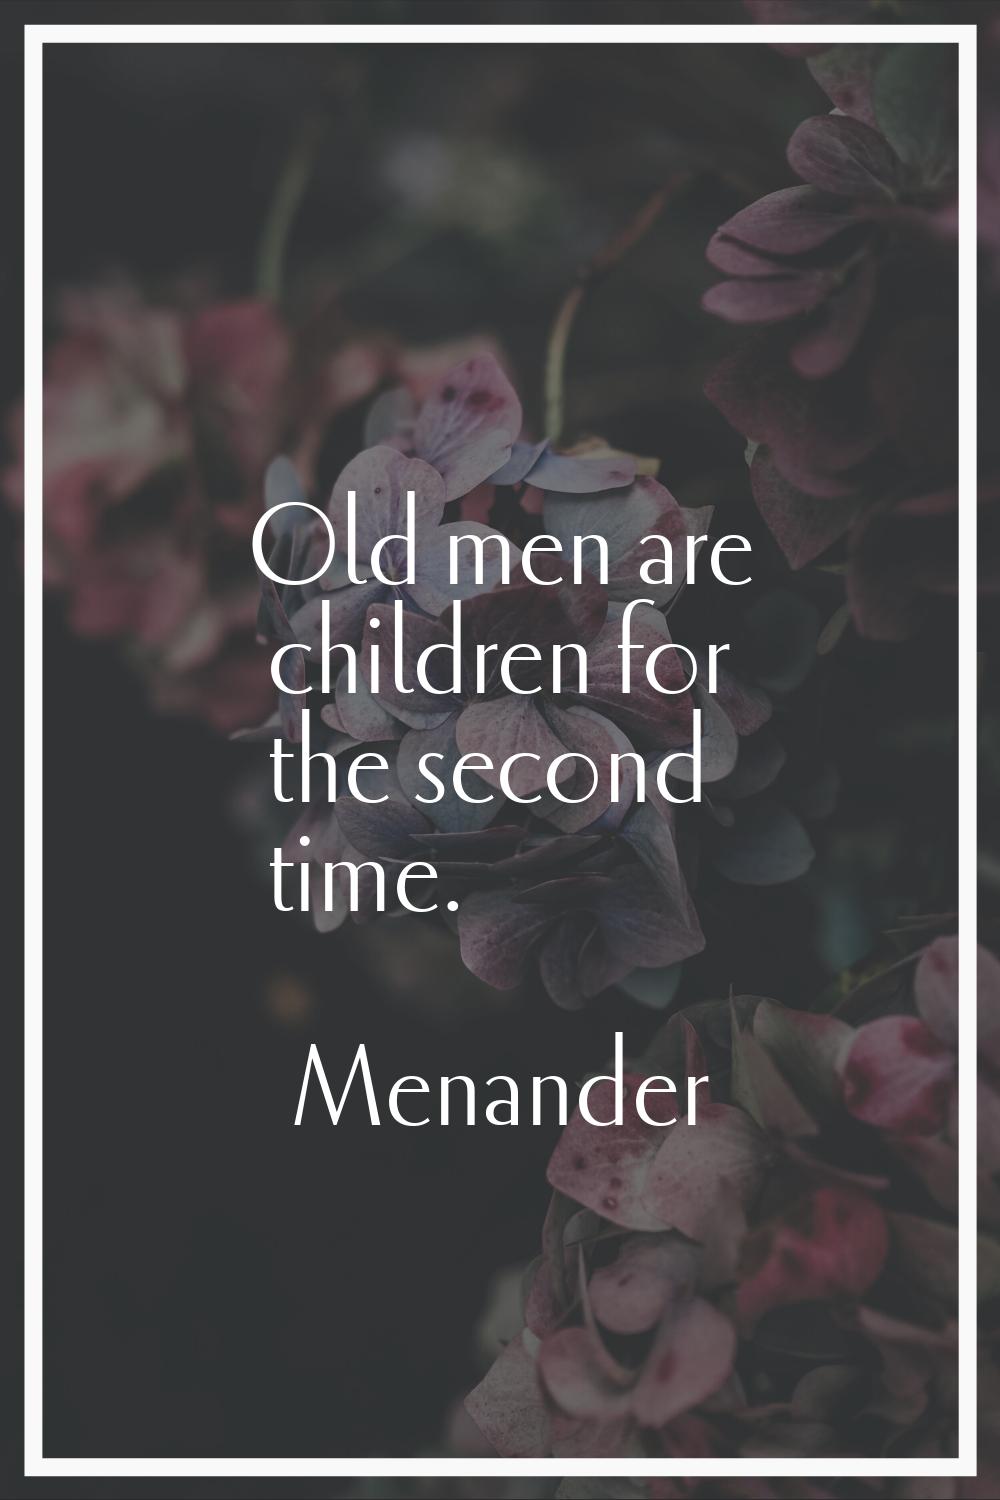 Old men are children for the second time.